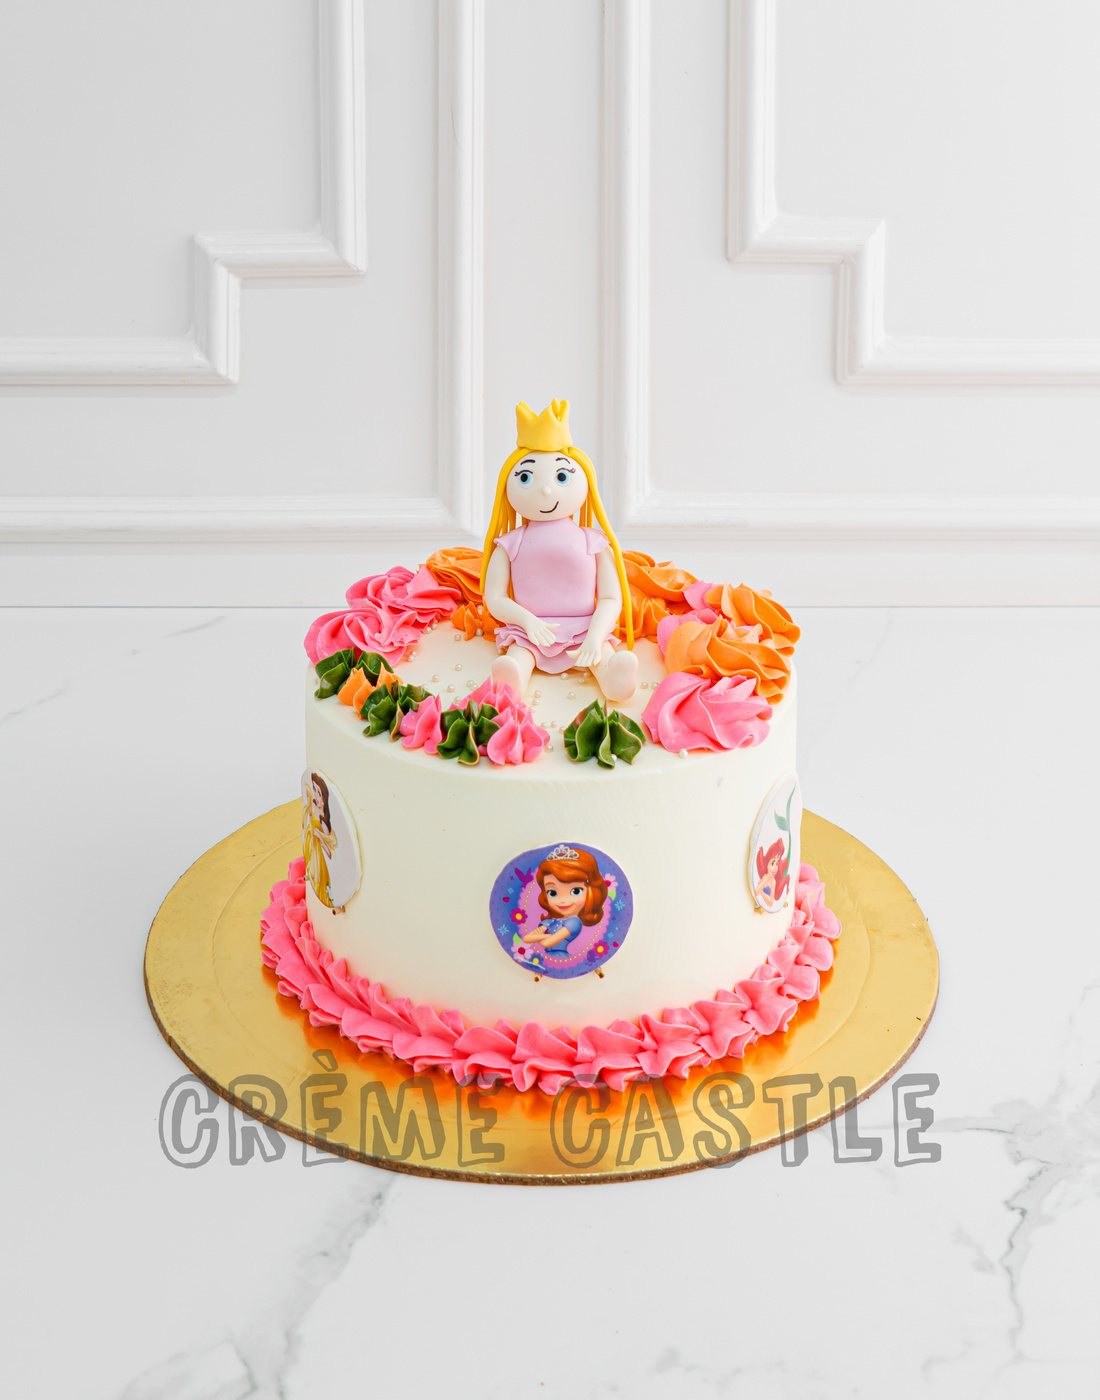 Sleeping Baby Doll Decoration Toys Birthday Cake Toppers Toys Baby Shower  Girl Boy 1st First Birthday Party Decorations Kids From Gy244643661, $0.55  | DHgate.Com